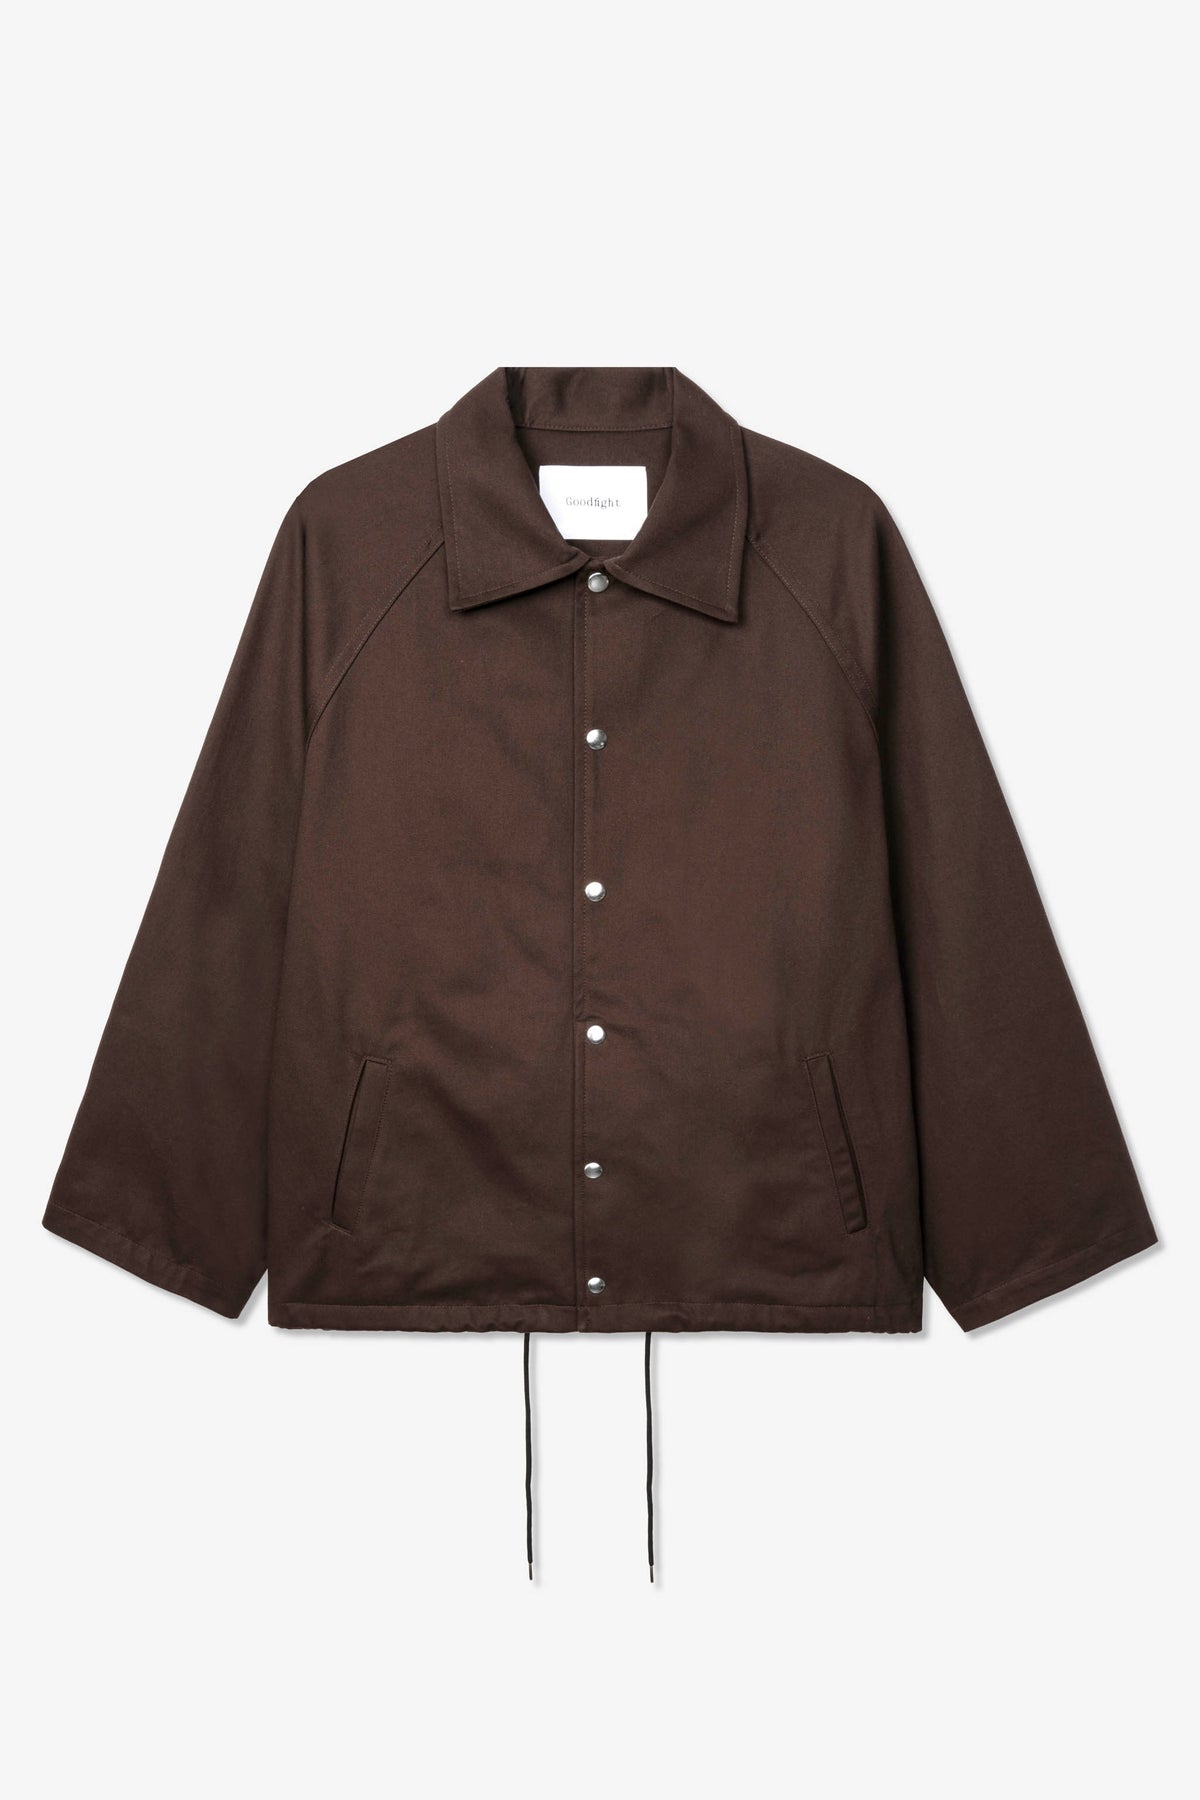 Goodfight x Dover Street Market Ginza Coaches Jacket Brown